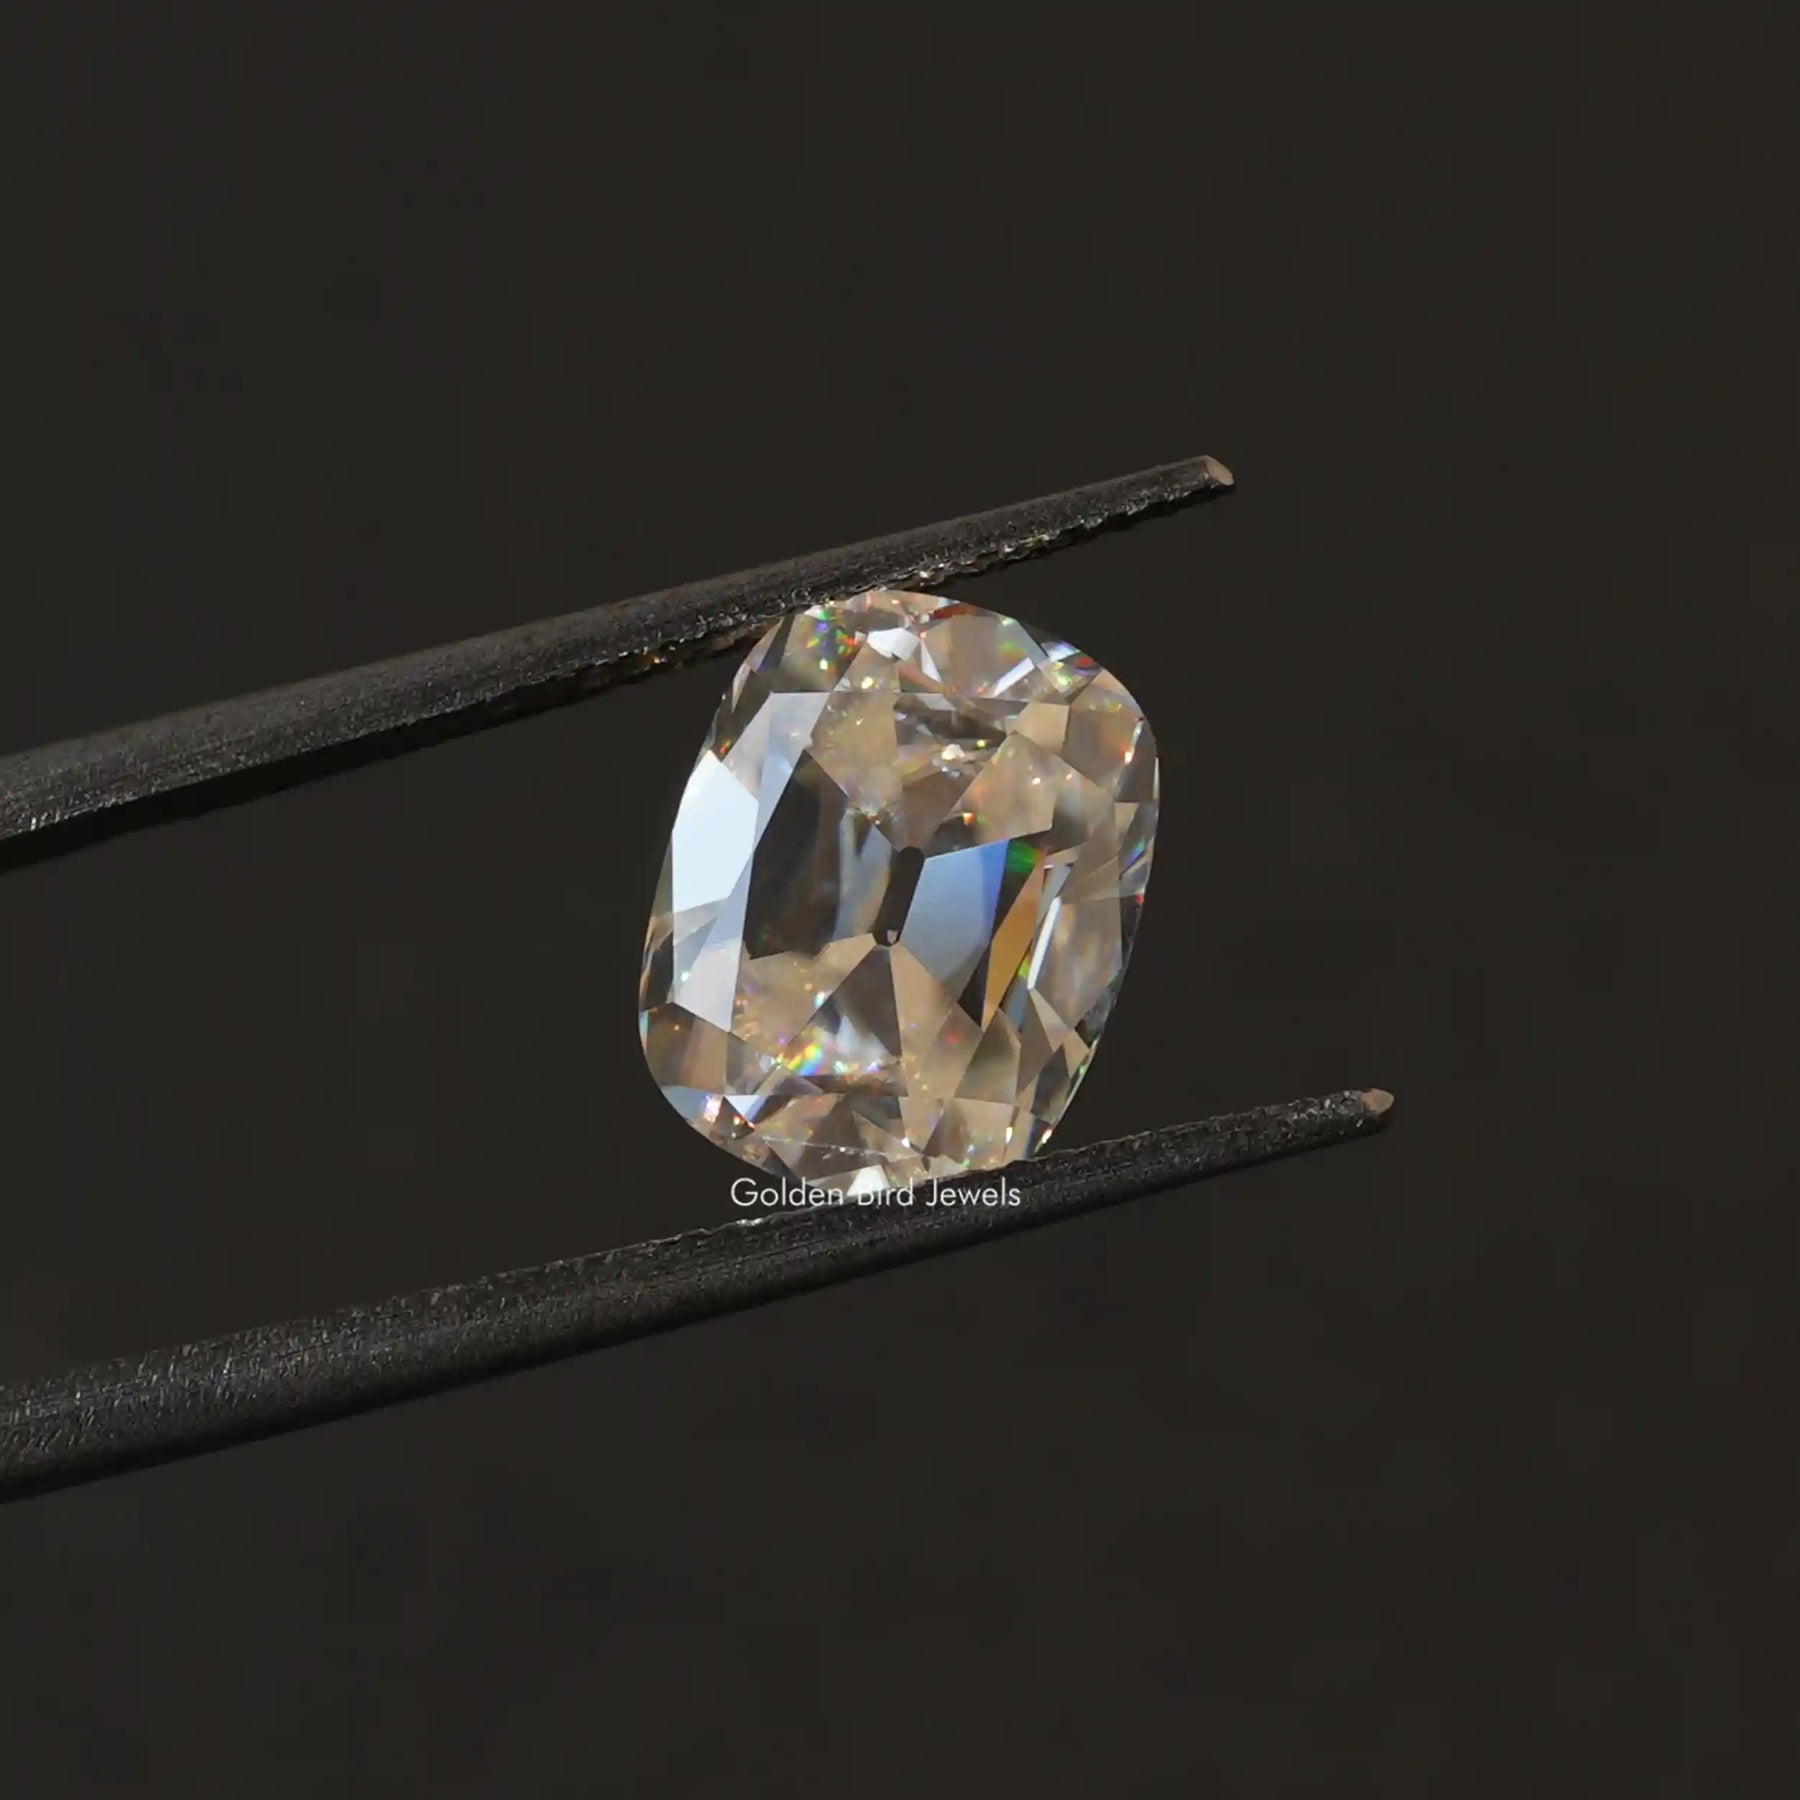 [This near colorless old mine cushion cut loose stone made of vvs clarity]-[Golden Bird Jewels]